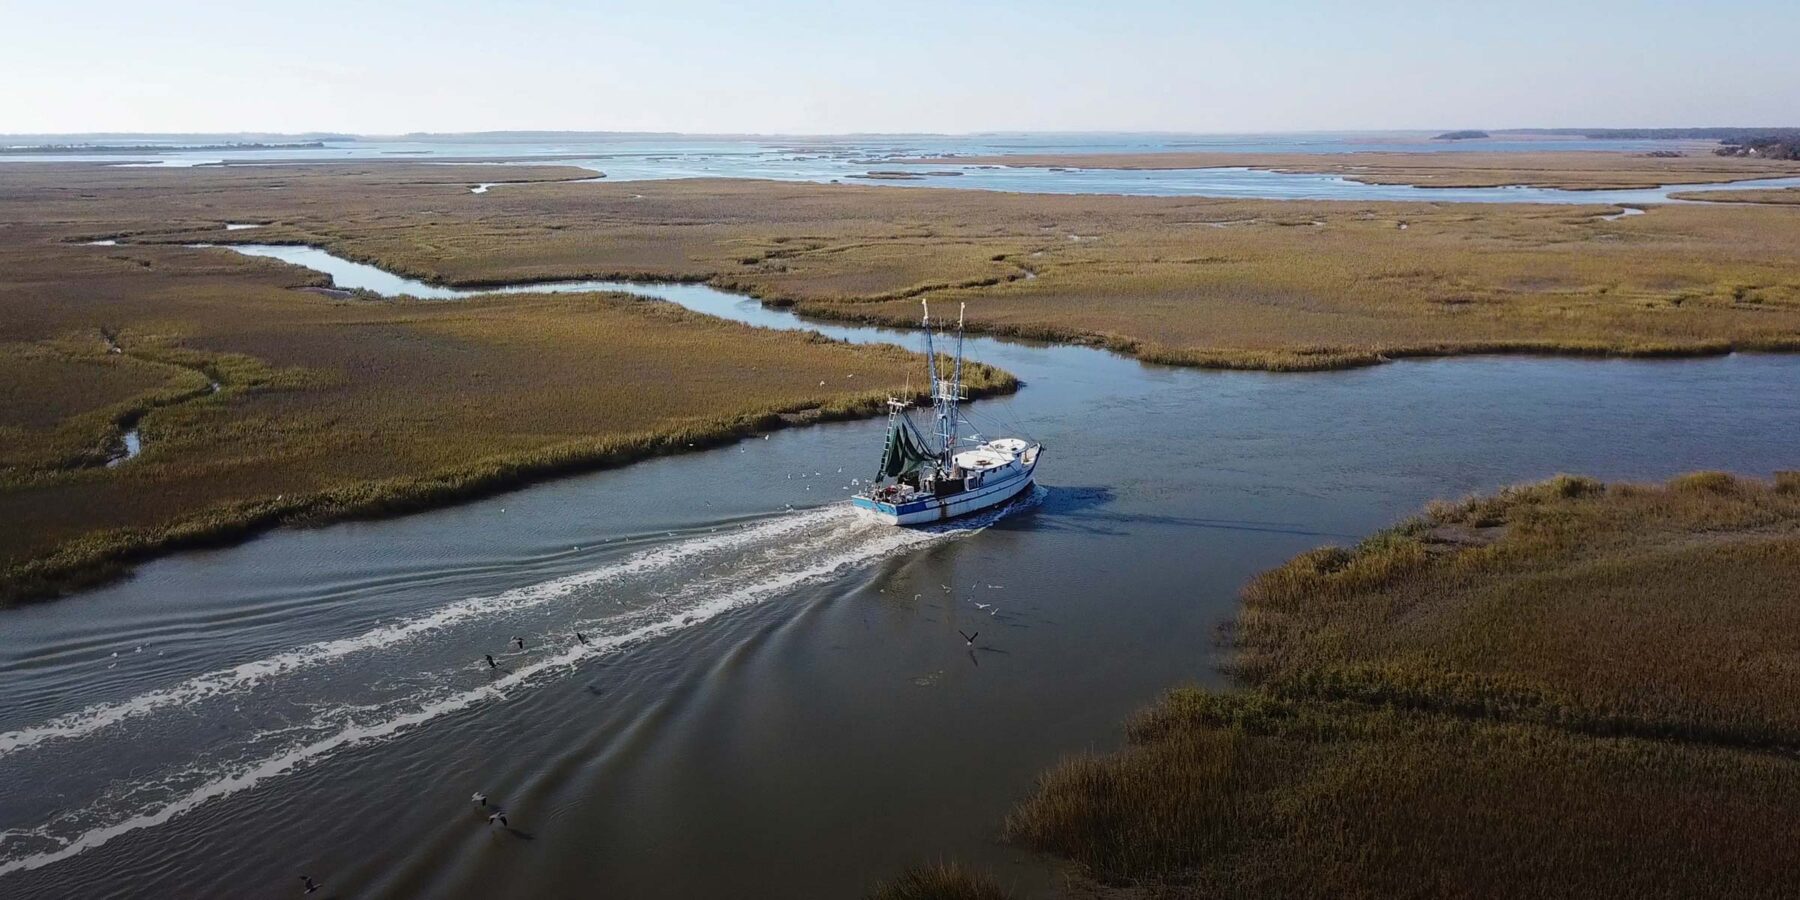 Aerial view of commercial fishing boat driving through marshy terrain in the Mississippi river